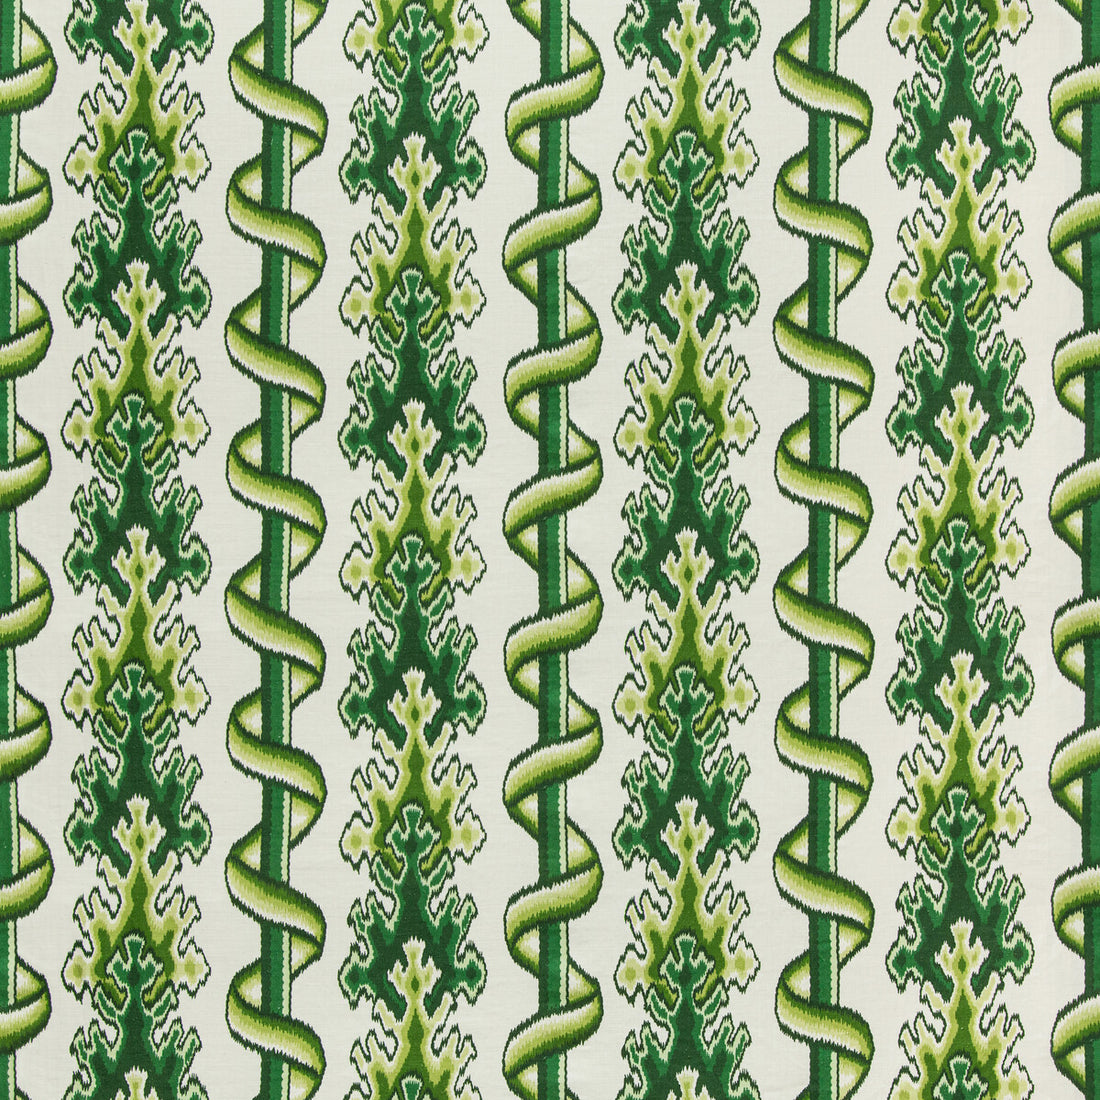 Montguyon Print fabric in leaf/aloe color - pattern 8020102.303.0 - by Brunschwig &amp; Fils in the Grand Bazaar collection